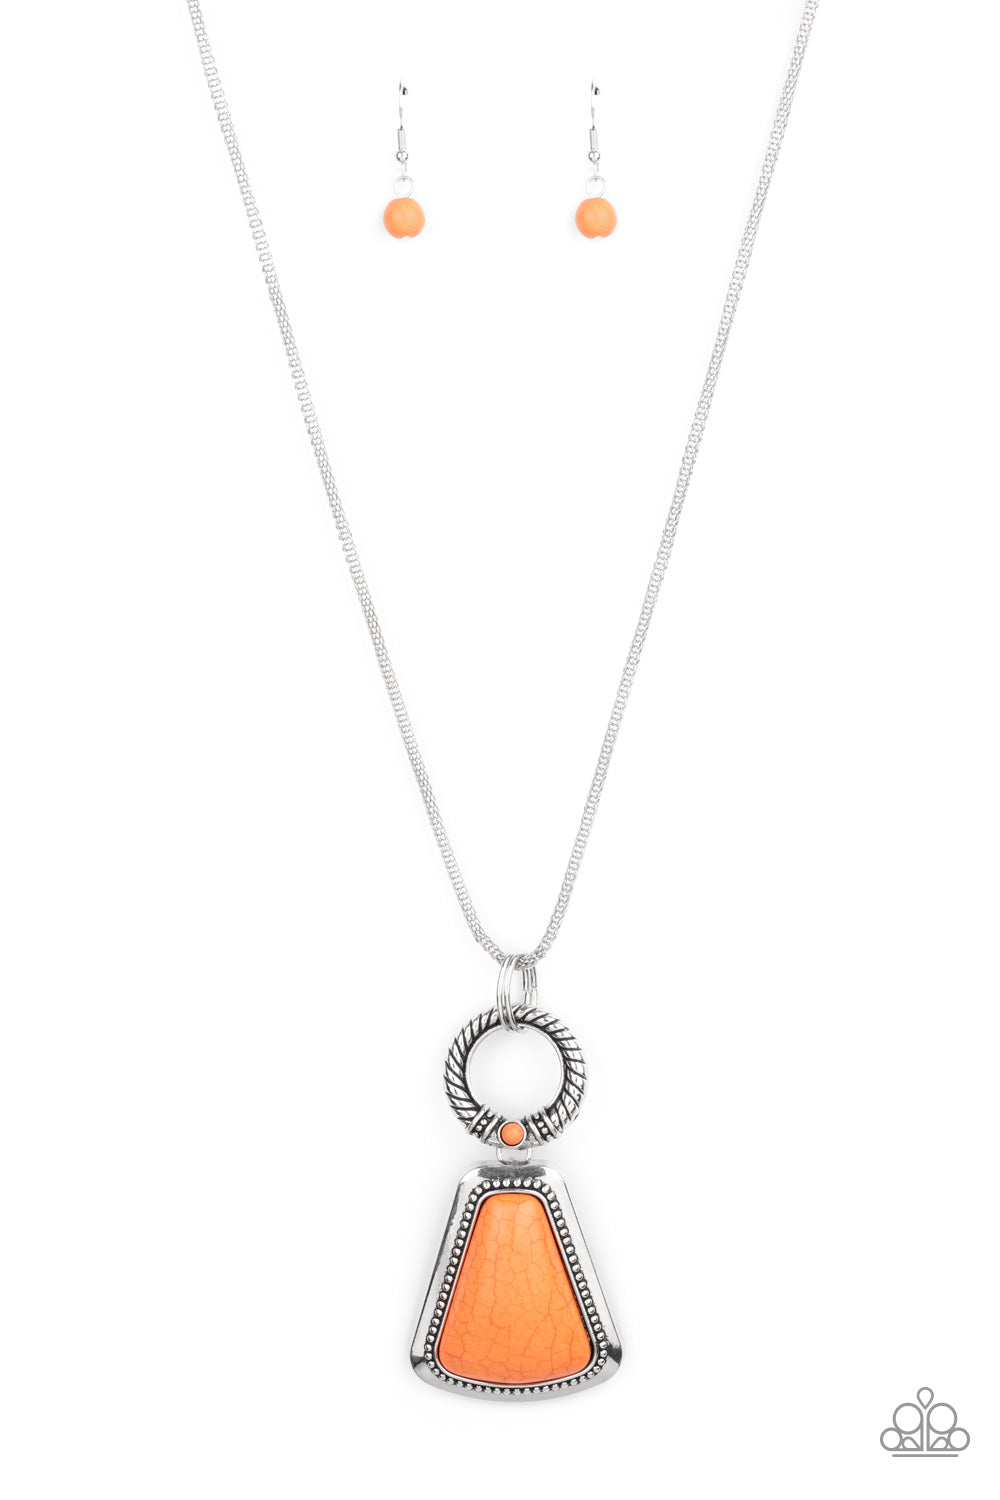 Stone Prairies Orange Necklace - Paparazzi Accessories  A flared triangular orange stone is pressed into the center of a studded silver frame. A textured ring, dotted with a dainty orange stone, links to the top of the stone creating a dramatically earthy pendant at the bottom of a lengthened round mesh chain. Features an adjustable clasp closure.  All Paparazzi Accessories are lead free and nickel free!  Sold as one individual necklace. Includes one pair of matching earrings.